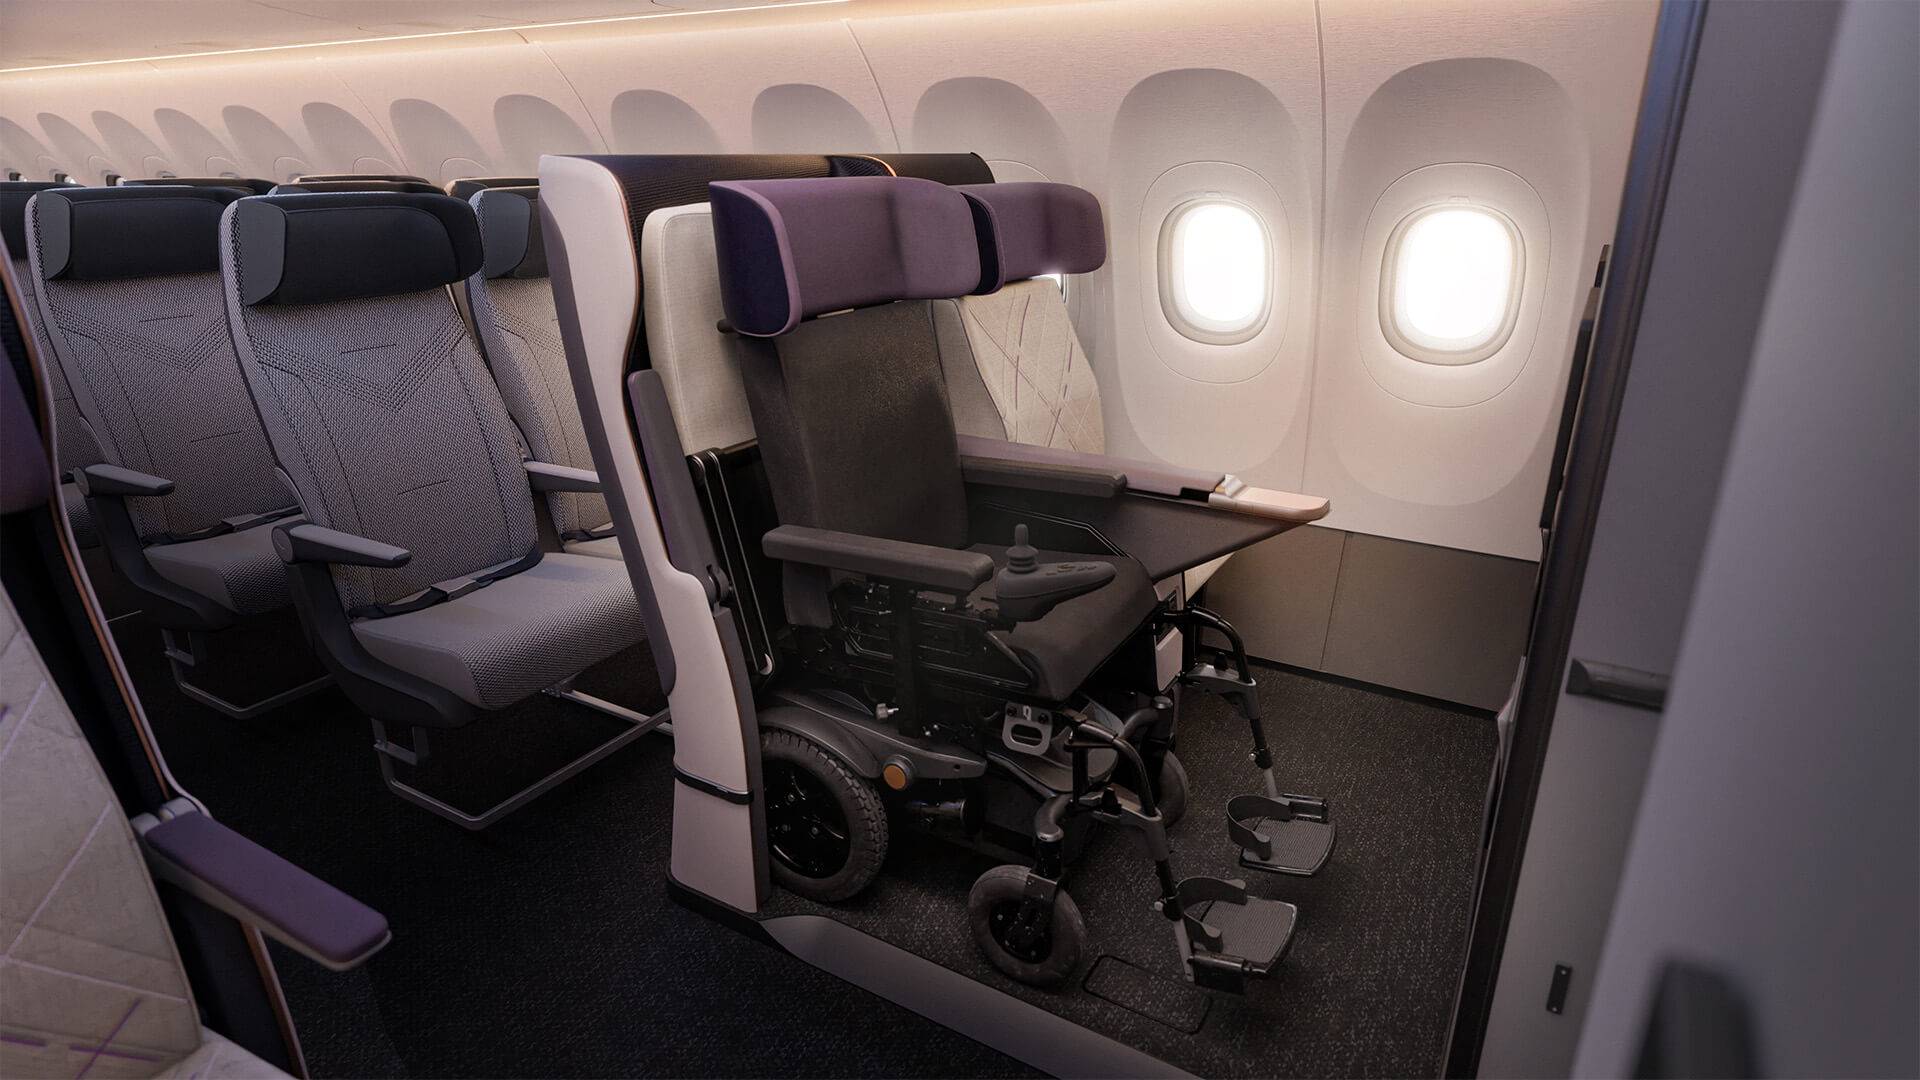 PG Designed Air 4 a system to help those with reduced mobility travel effortlessly picture shows wheelchair in place